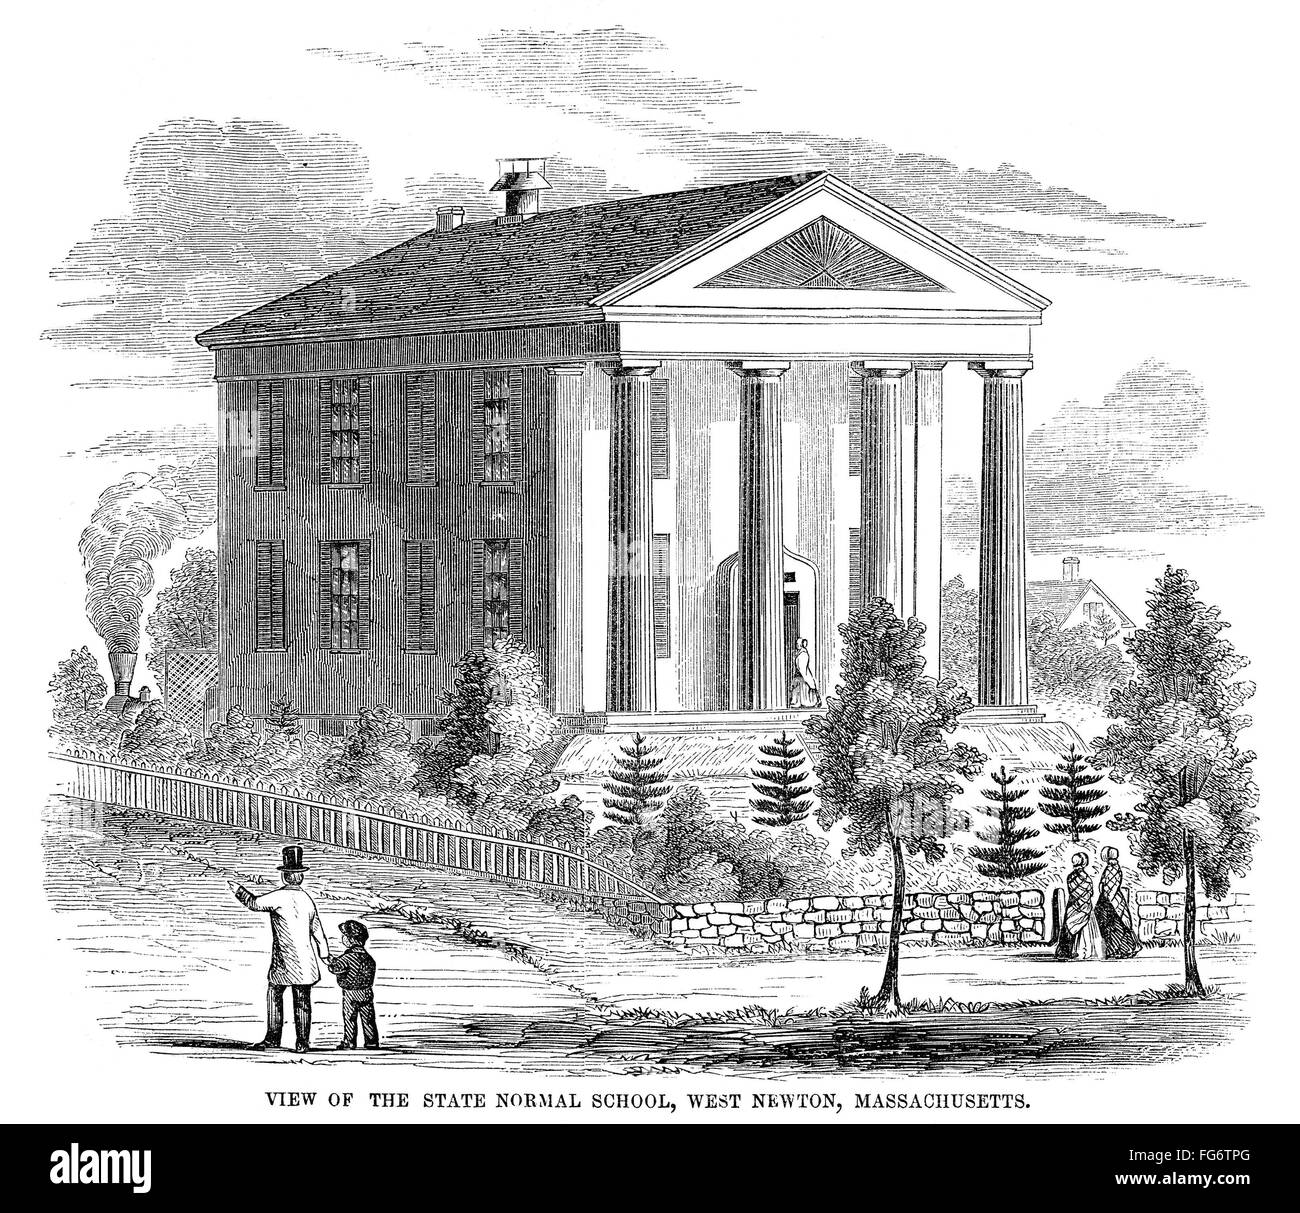 NORMAL SCHOOL, 1853. /nThe State Normal School at West Newton, Massachusetts. Wood engraving, American, 1853. Stock Photo